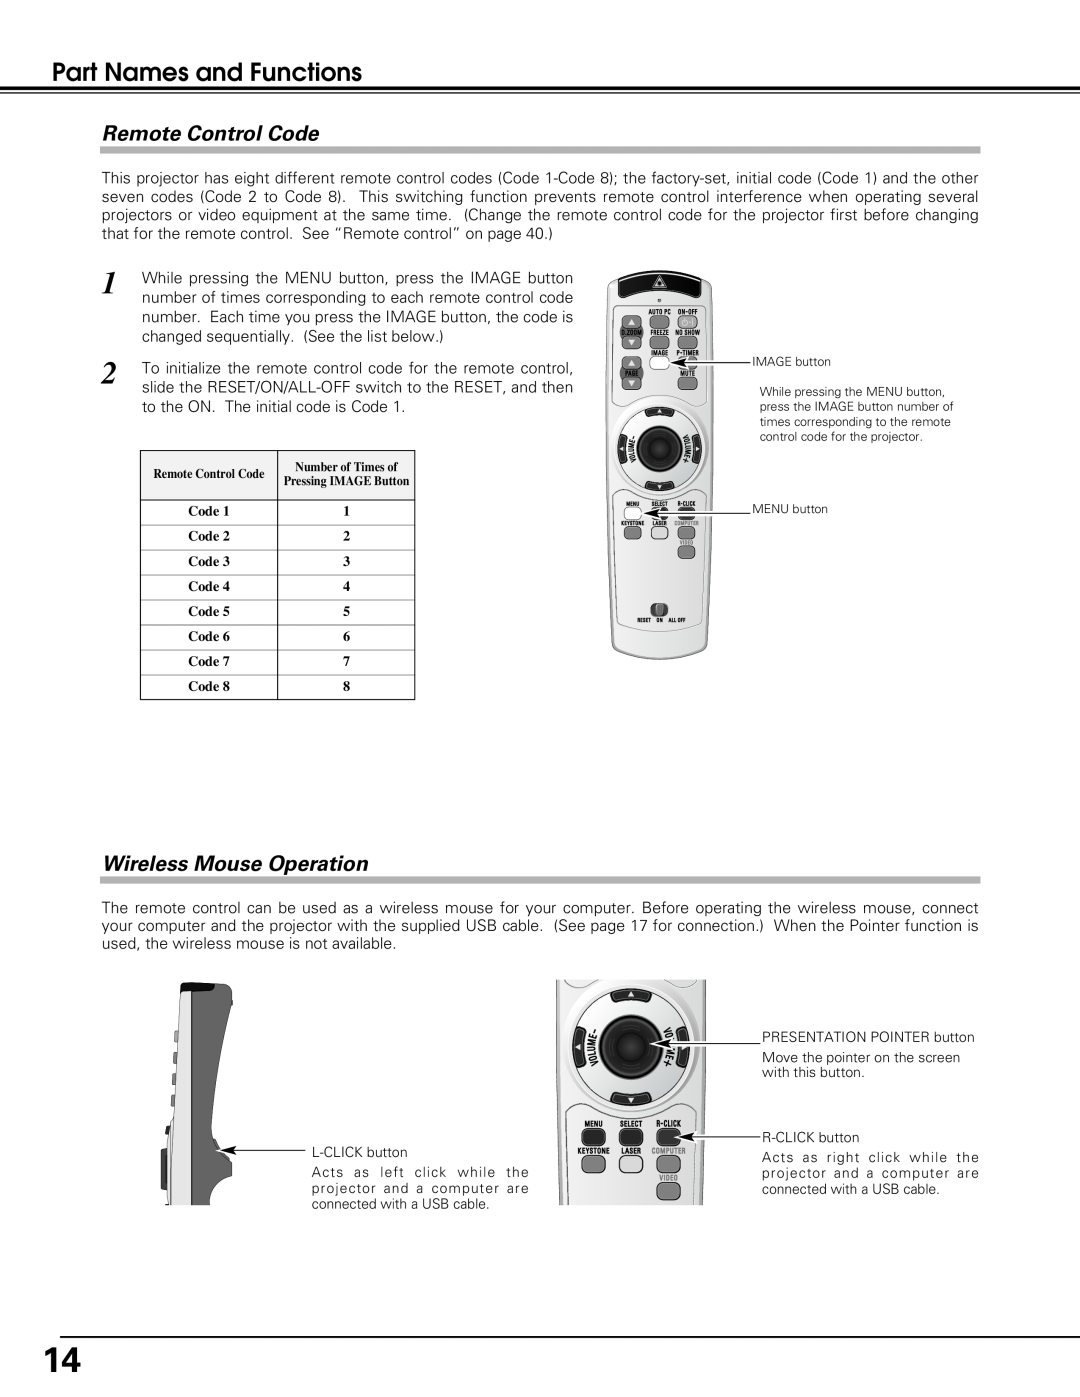 Christie Digital Systems 38-VIV208-01 user manual Remote Control Code, Wireless Mouse Operation, Part Names and Functions 